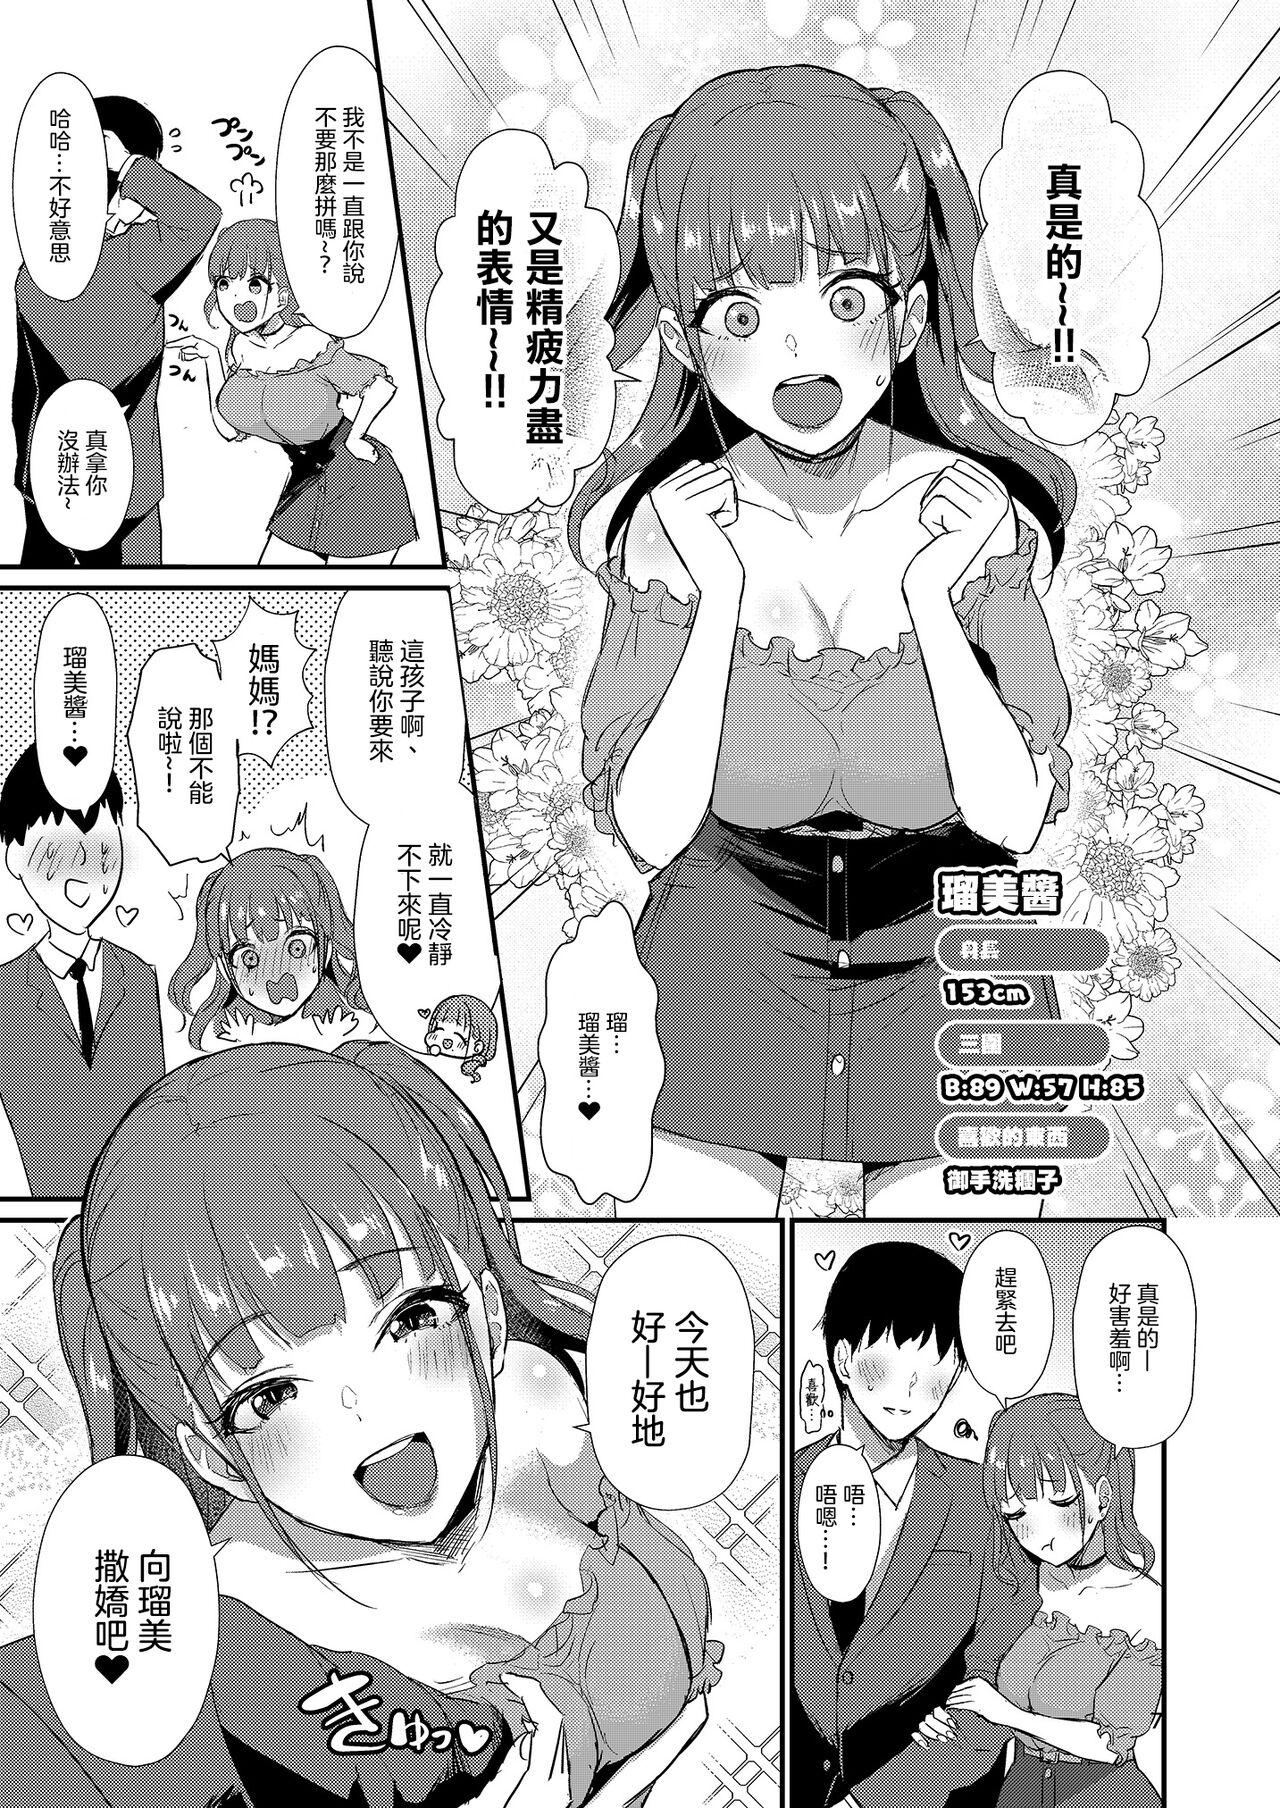 Teasing Homehome Home e Youkoso! - Welcome to Home Home Home! | 歡迎來到誇誇屋！ - Original Cum Shot - Page 8